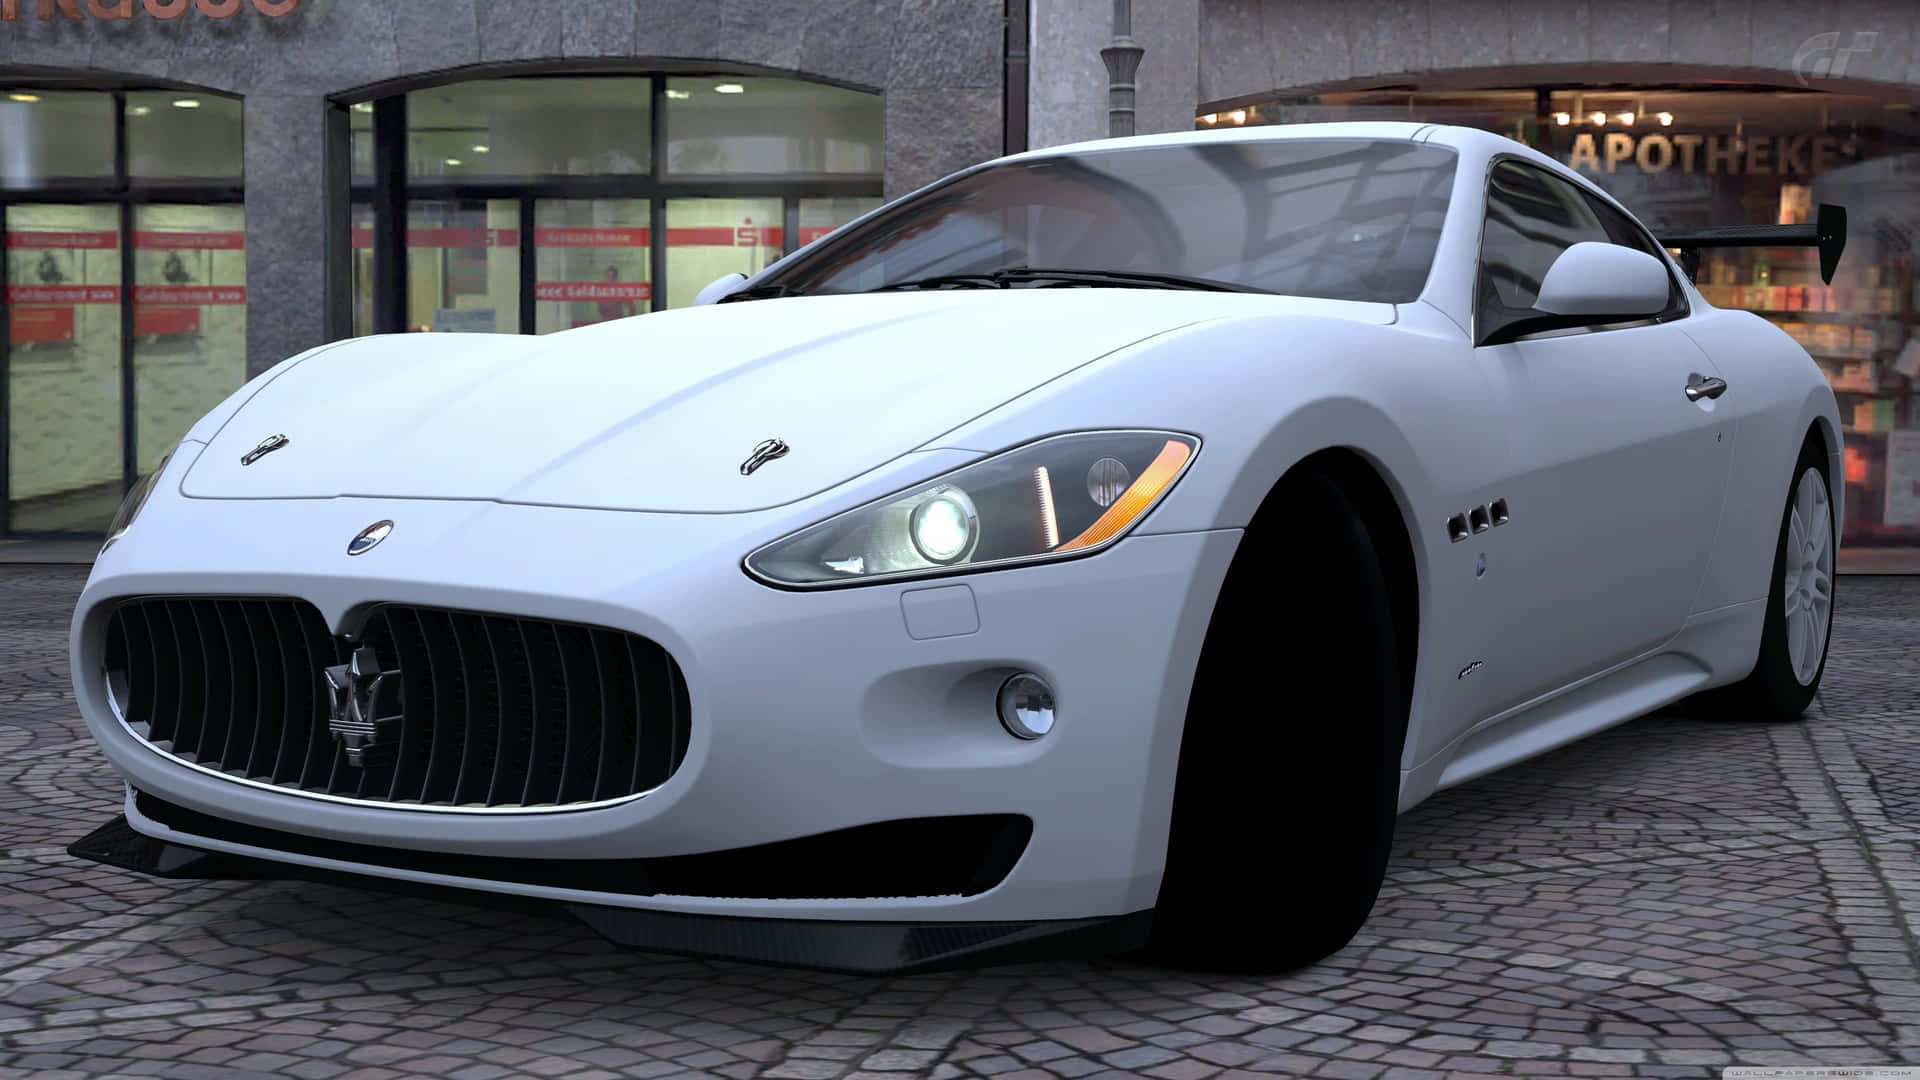 "Experience a Whole New Level of Luxury with the 4K Maserati" Wallpaper